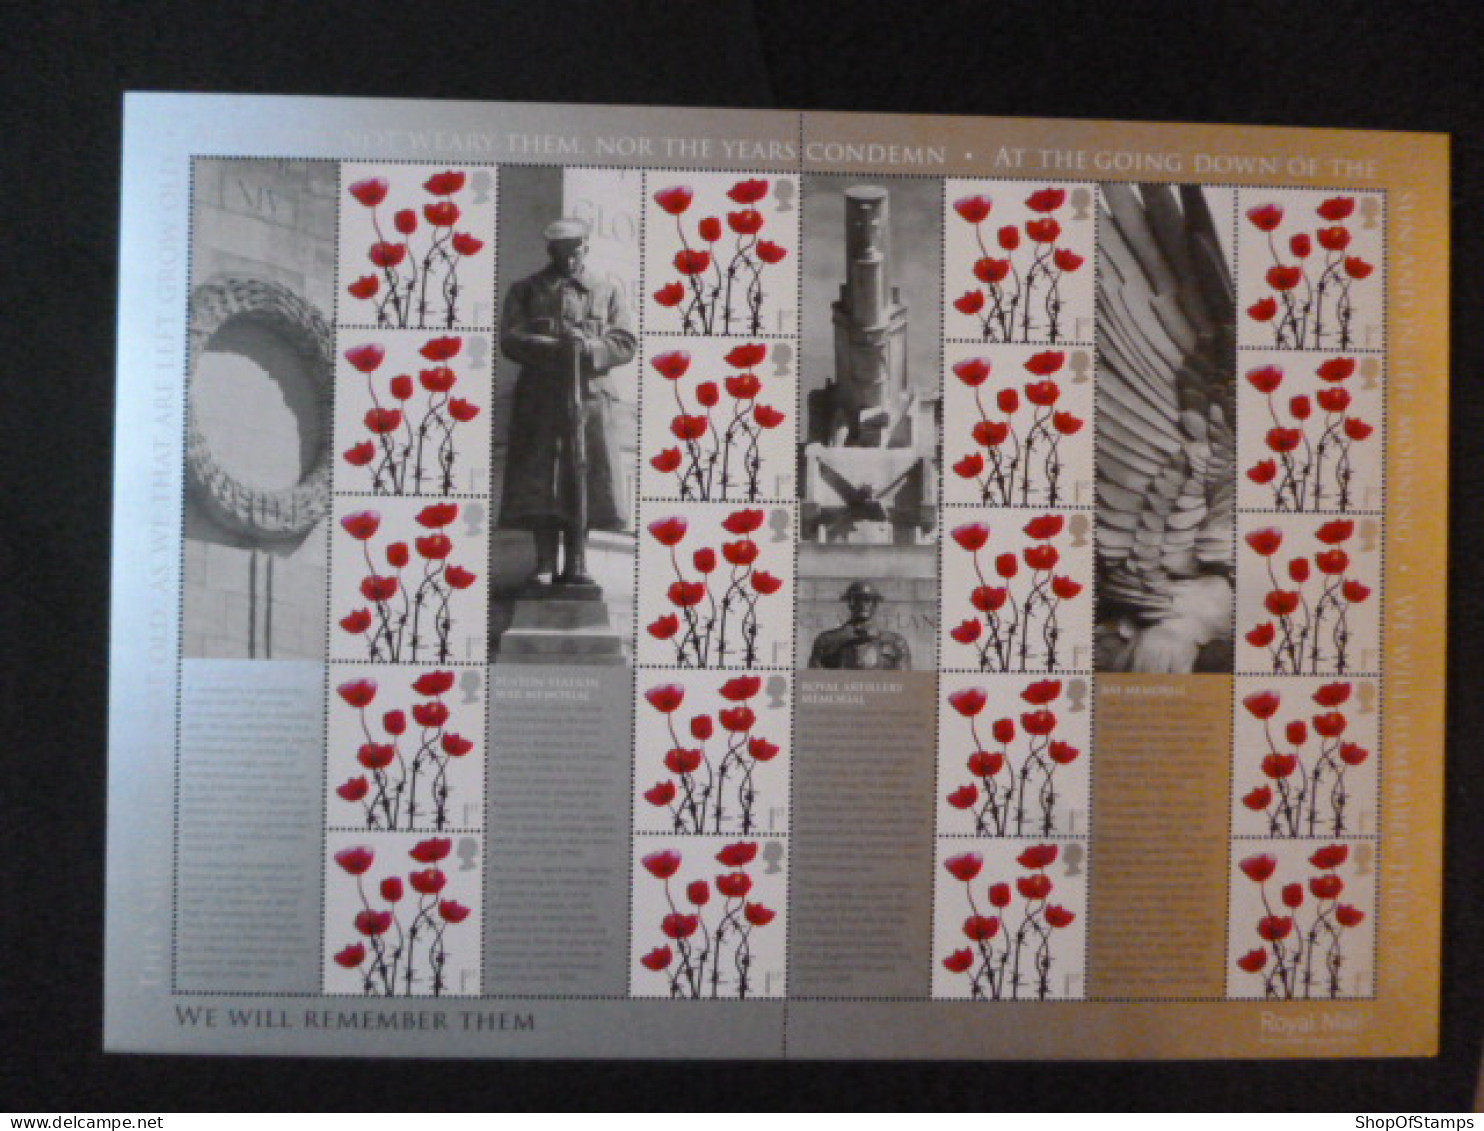 GREAT BRITAIN SG 2883 WE WILL REMEMBER THEM 20 STAMPS SMILER SHEET WITH GUTTERS & LABELS - Sheets, Plate Blocks & Multiples